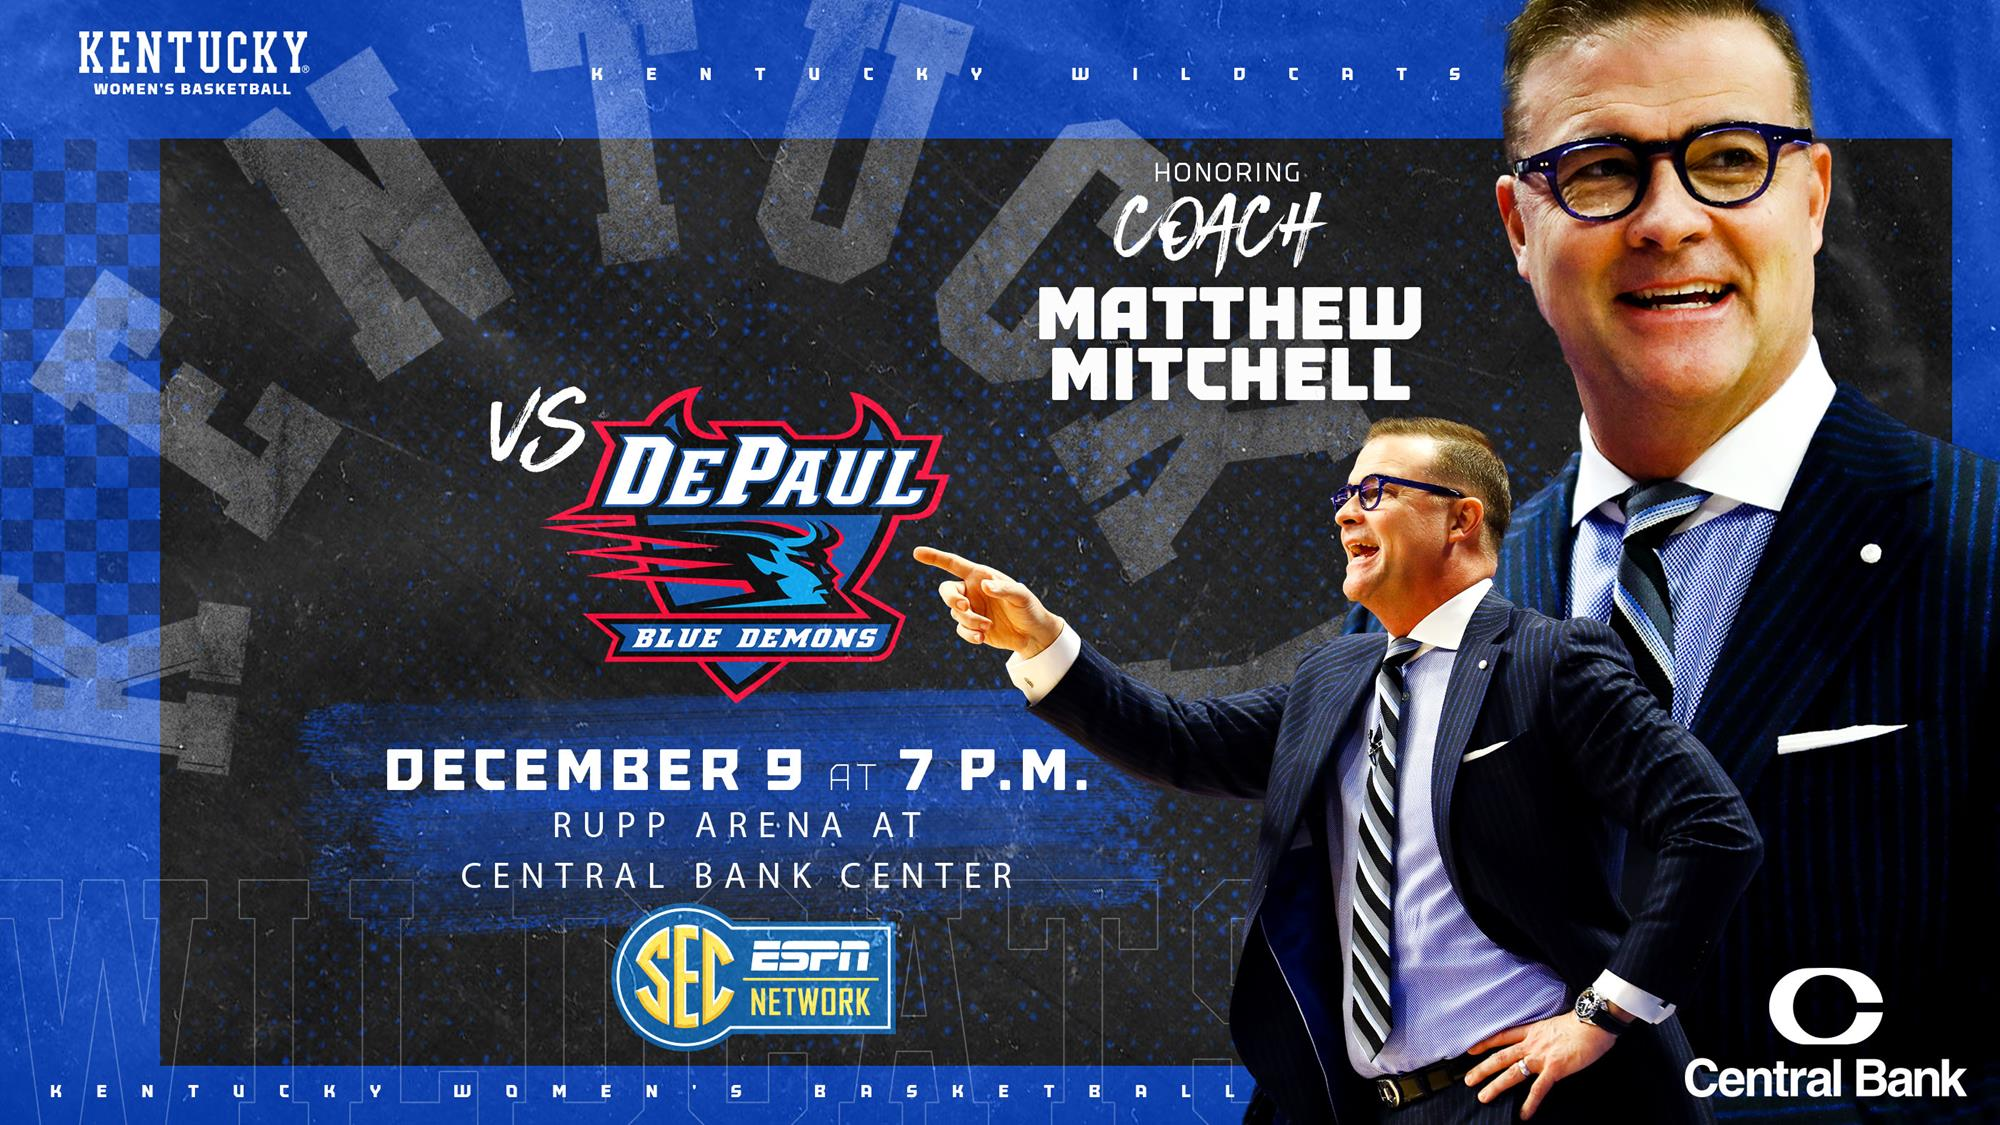 No. 14 Kentucky Honors Coach Mitchell, Hosts DePaul Thursday at Rupp Arena